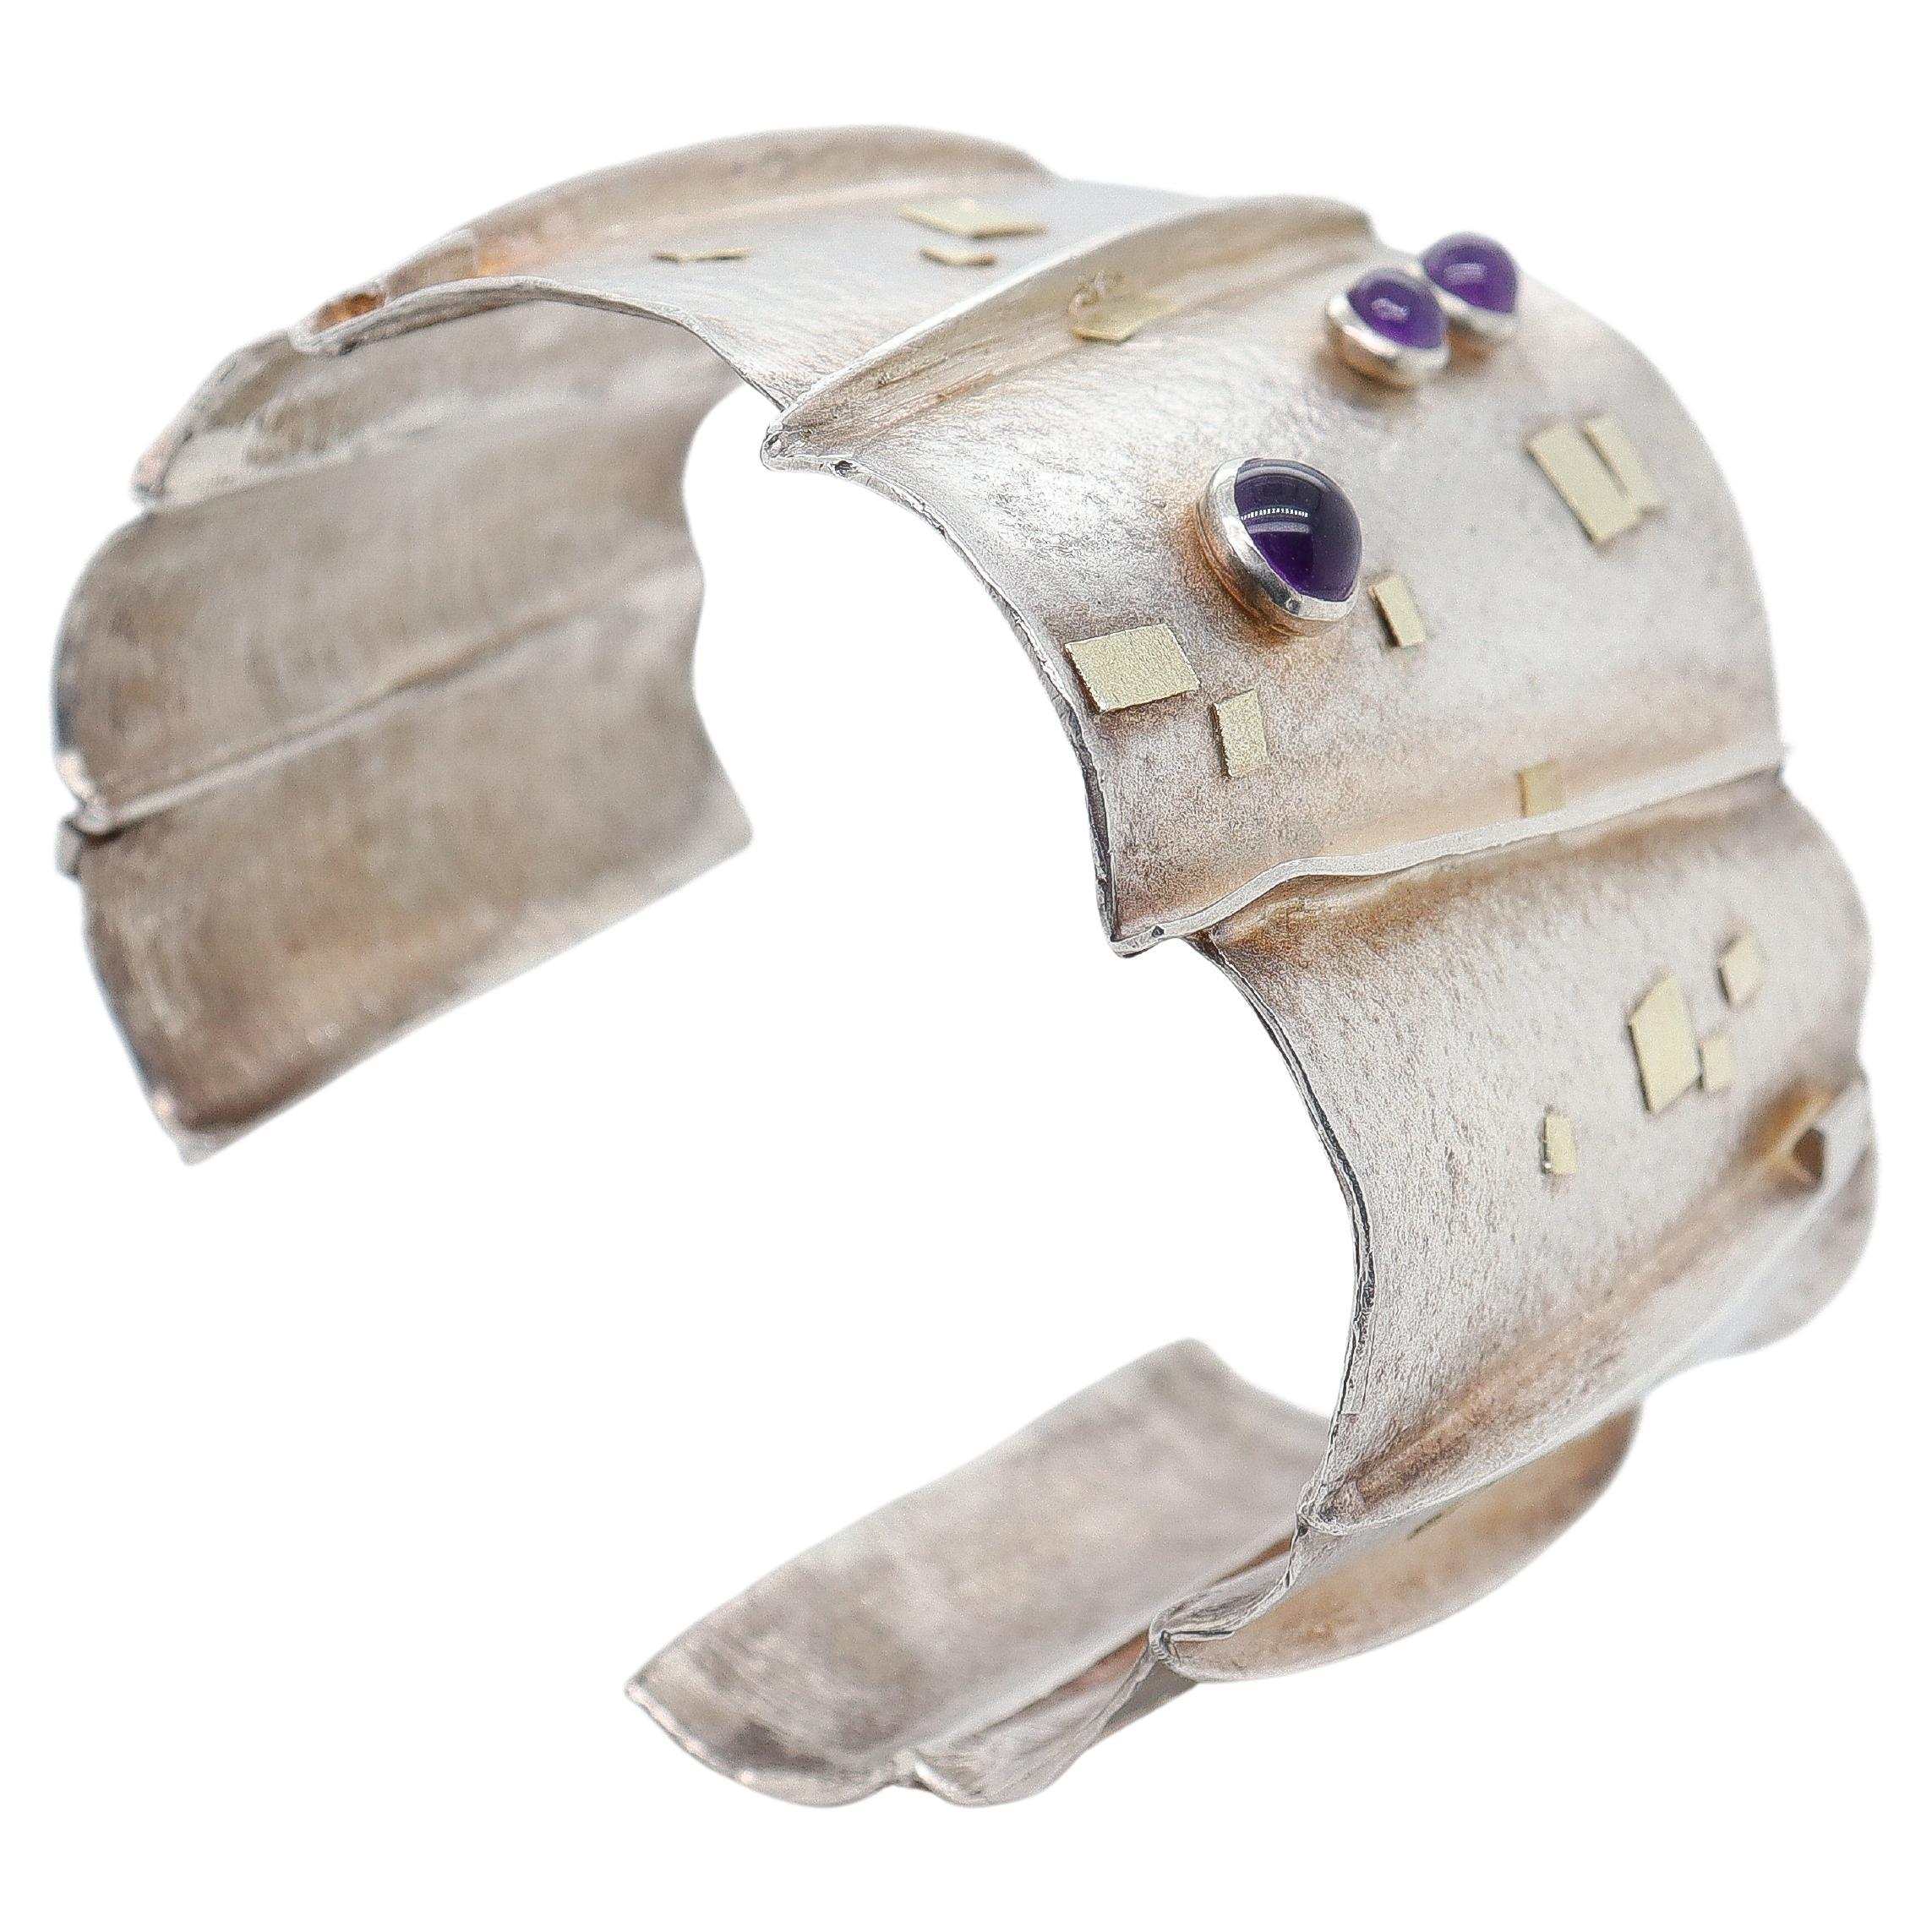 Modernist Silver, Gold, & Amethyst Cuff Bracelet Attributed to Enid Kaplan For Sale